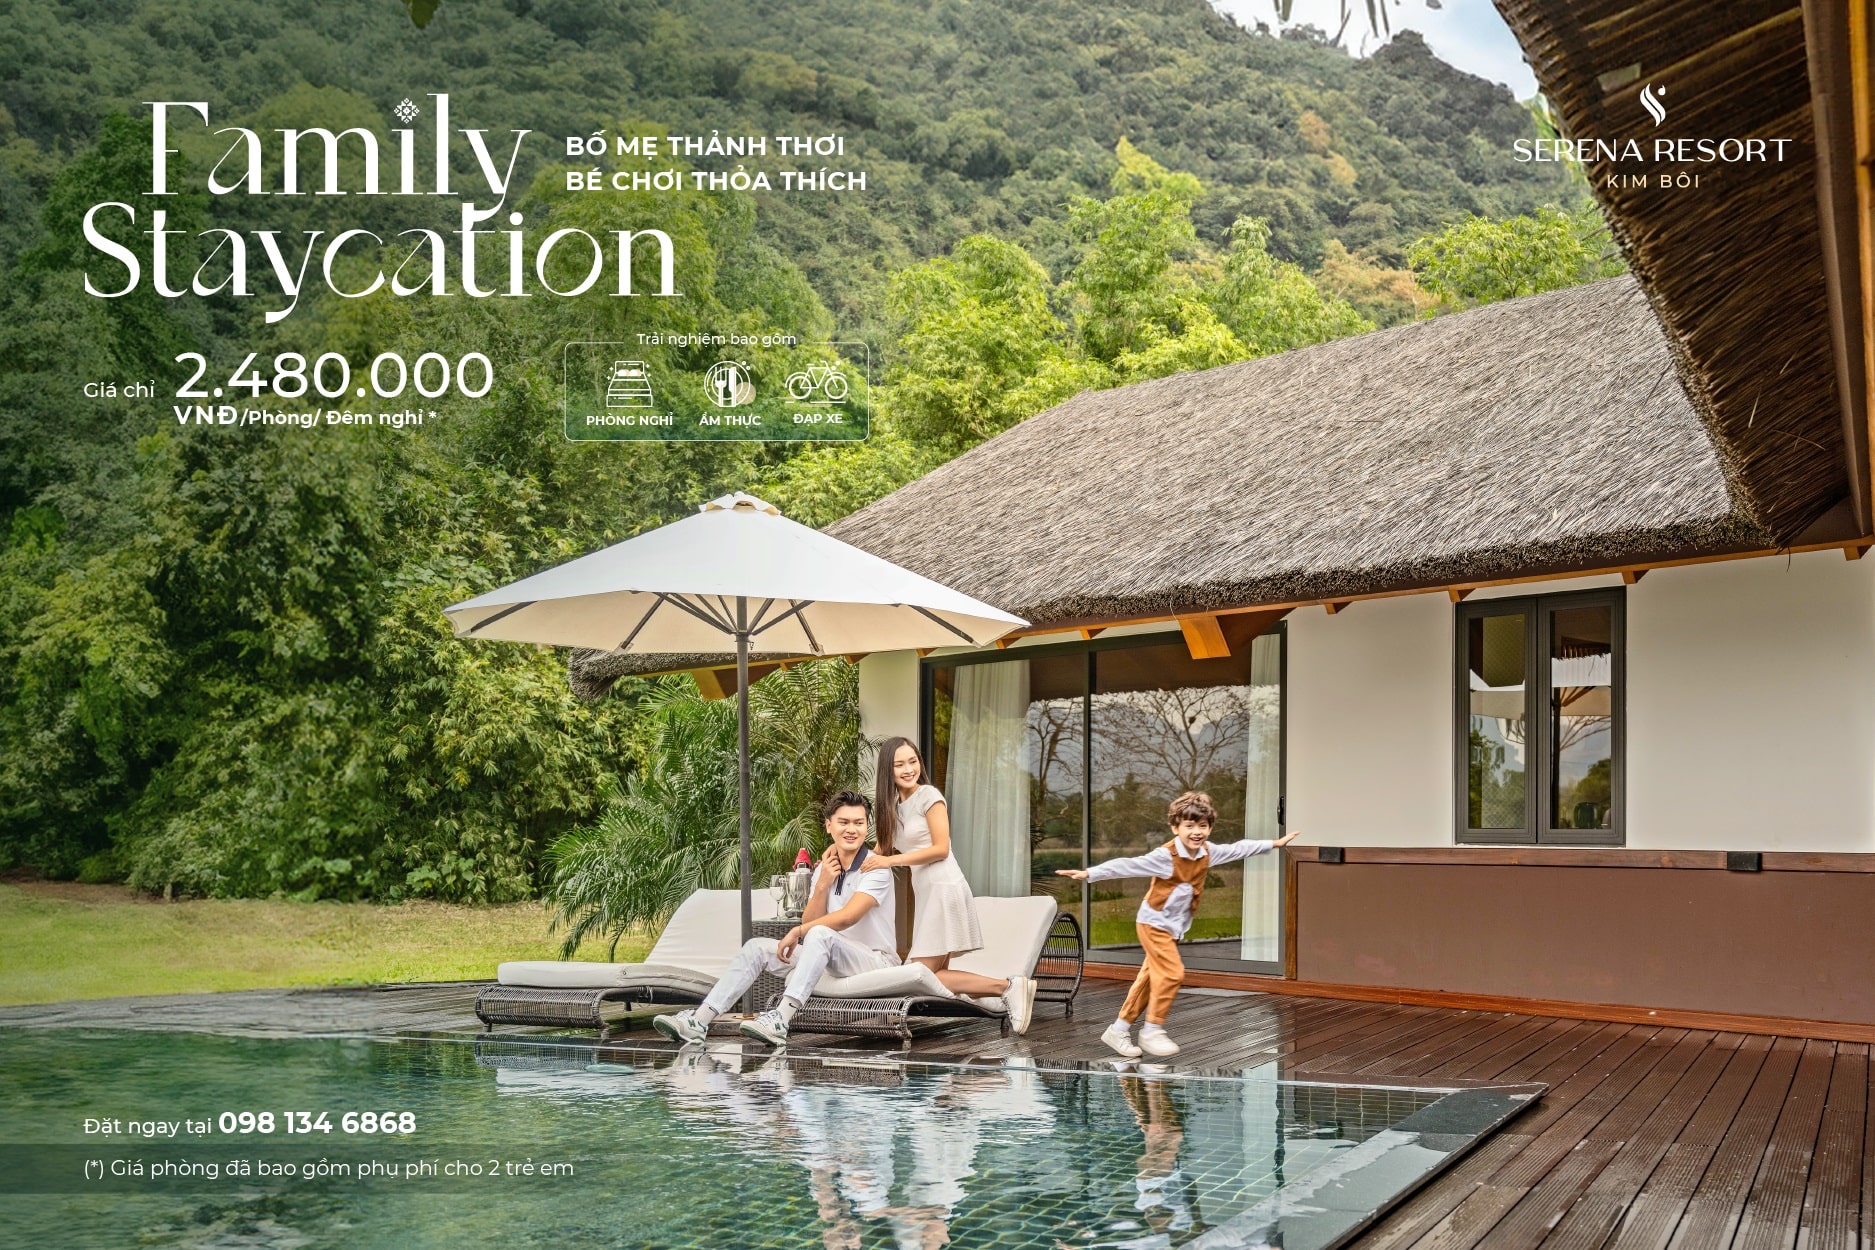 FAMILY STAYCATION – SPECIAL PROMOTION FOR FAMILY